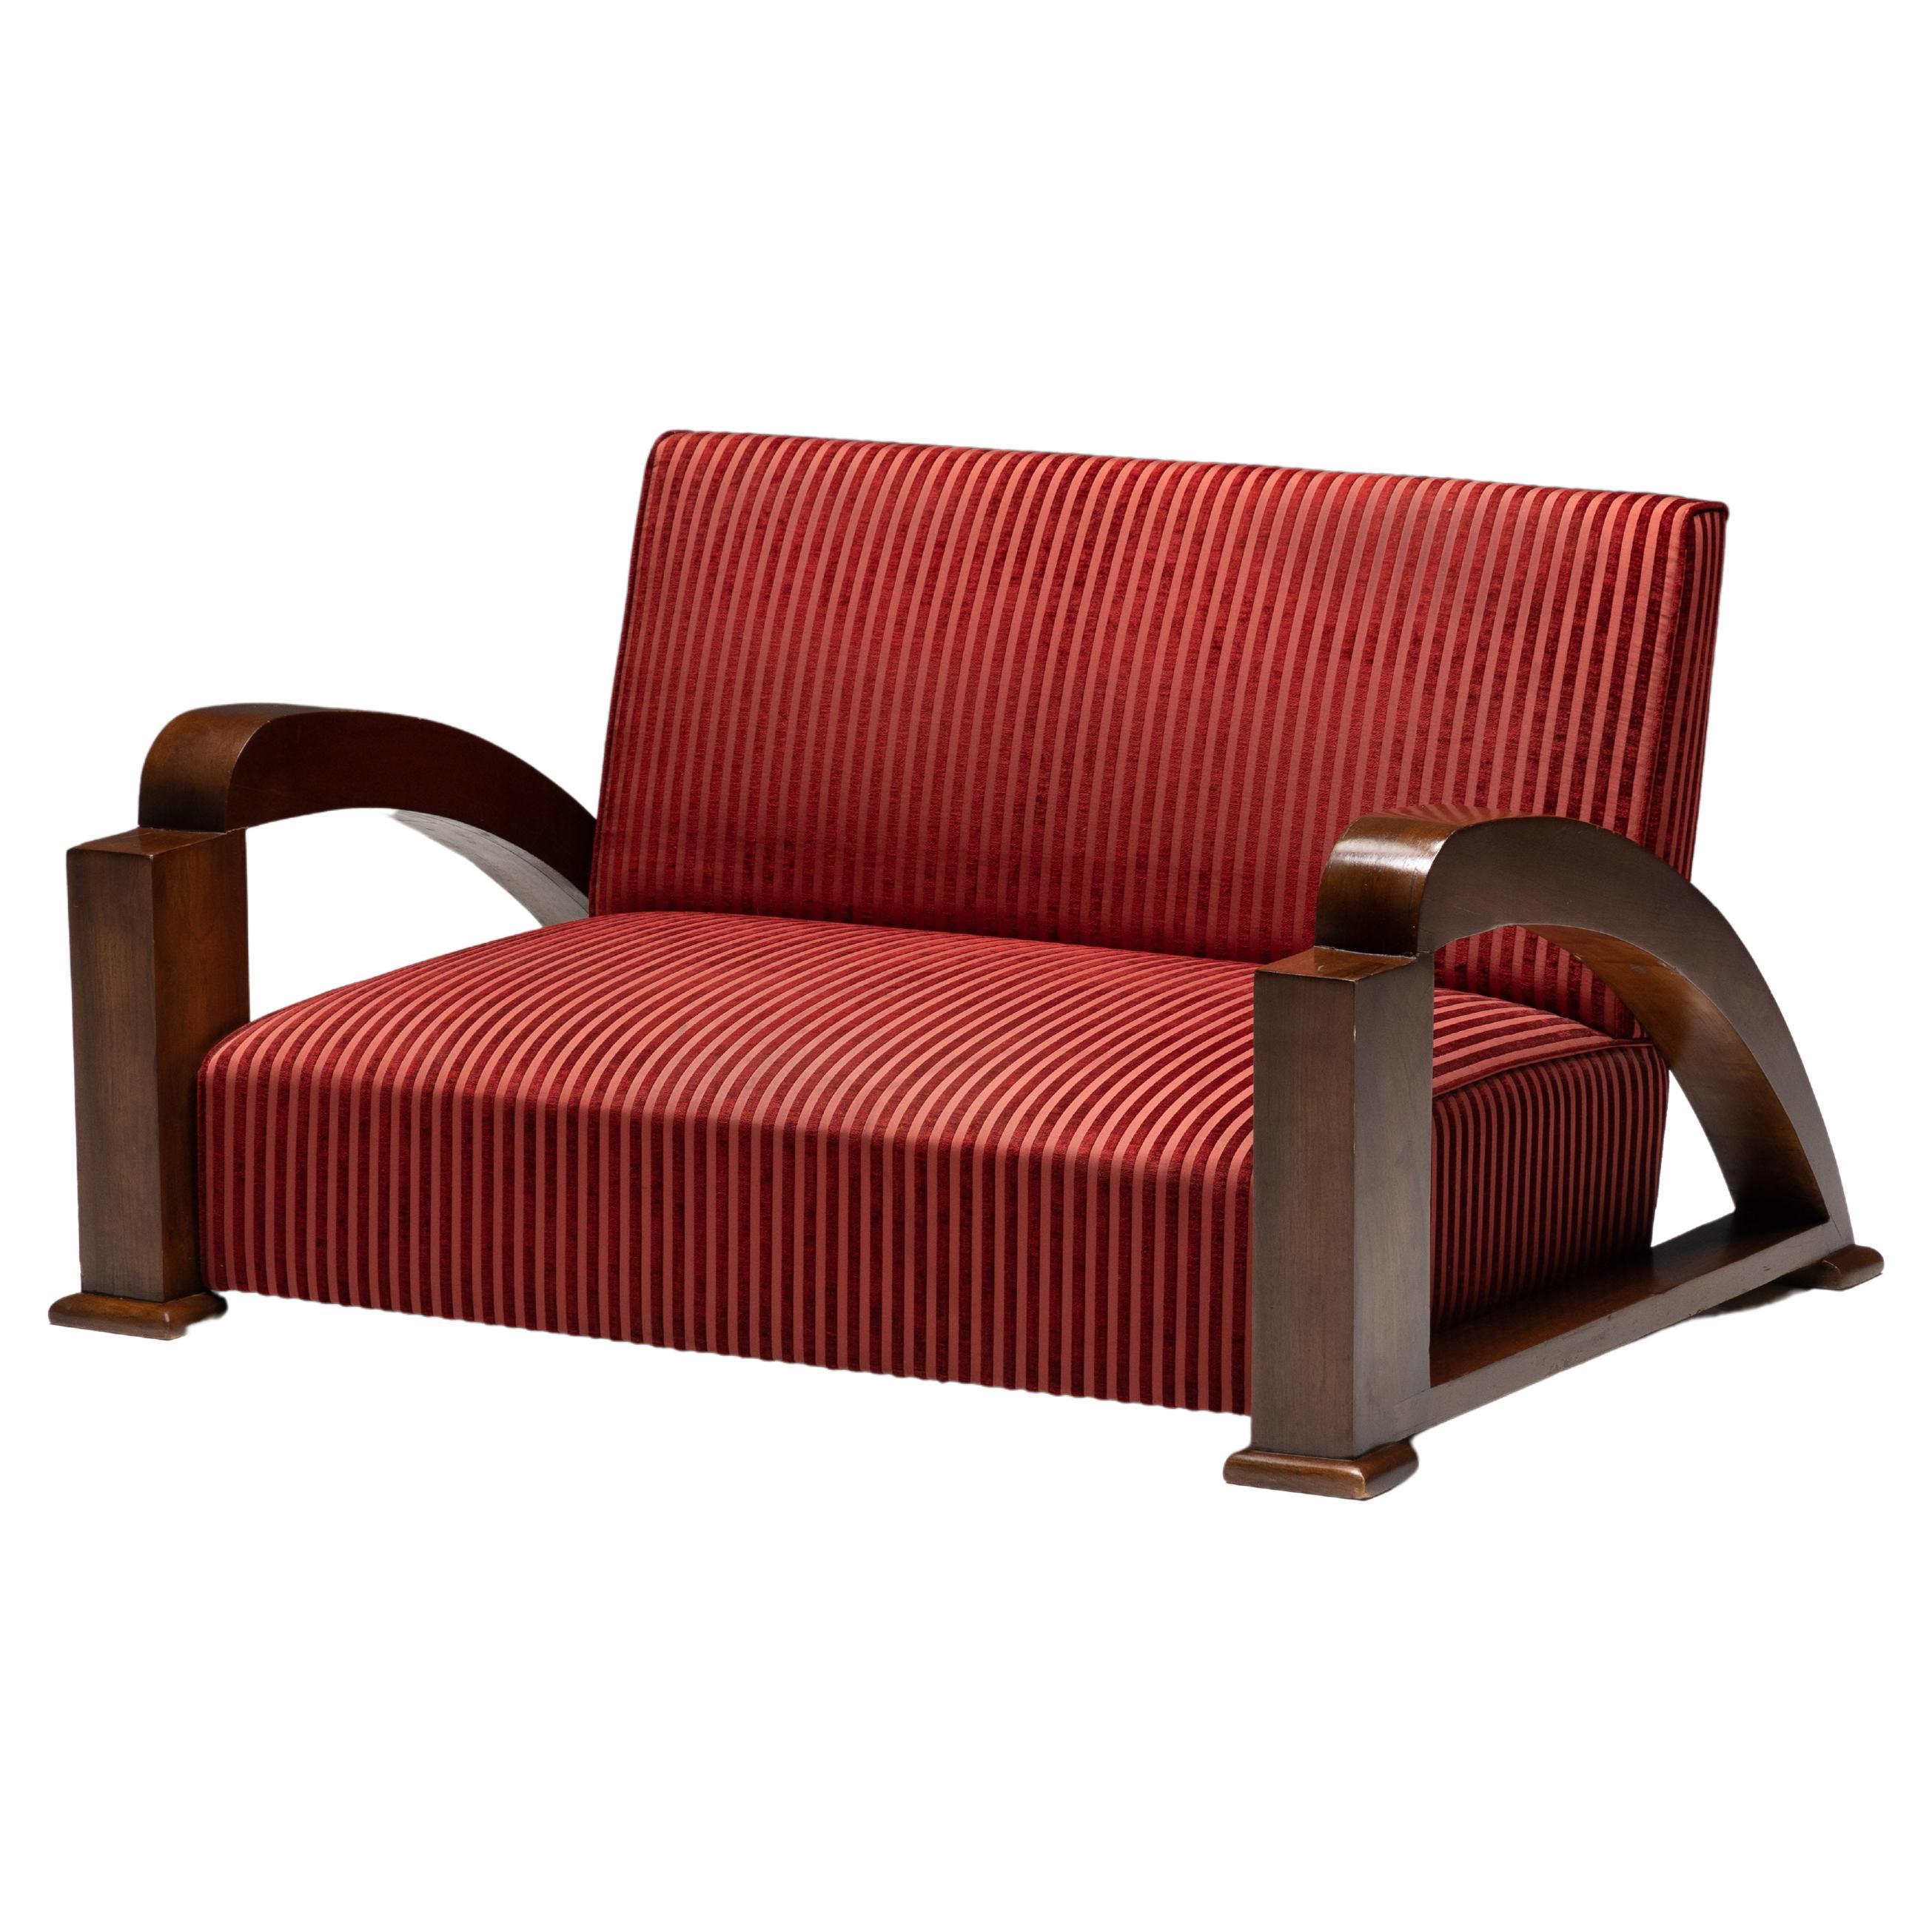 Art Deco Sofa in Red Striped Velvet and with Swoosh Armrests, France, 1940s For Sale